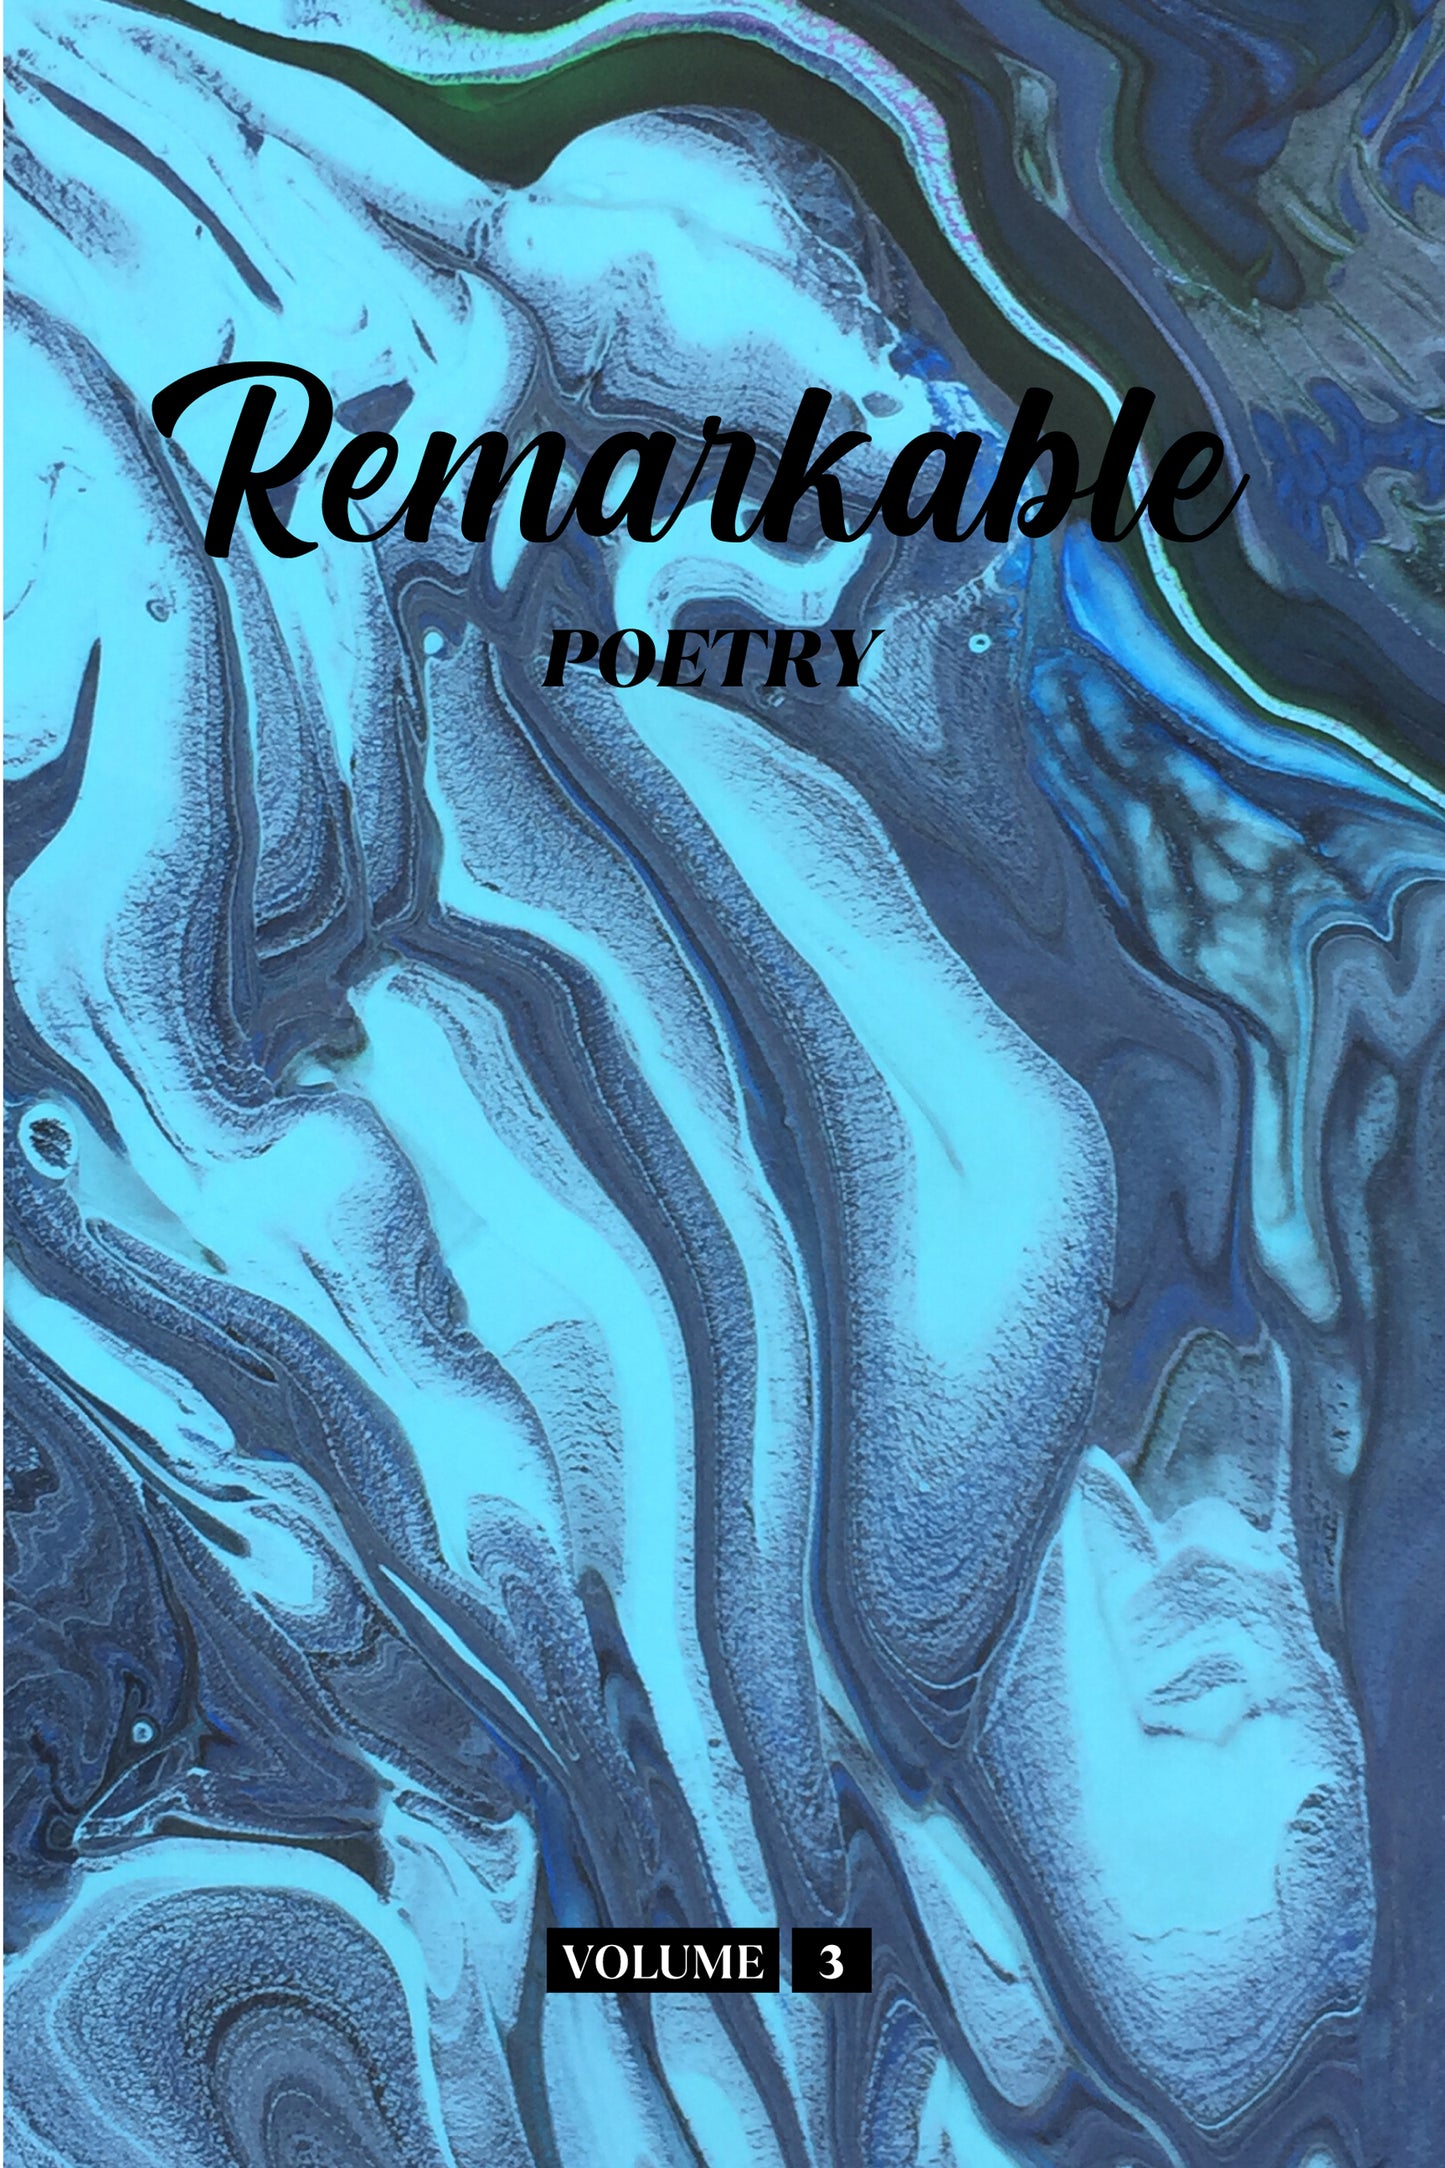 Remarkable Poetry (Volume 3) - Physical Book